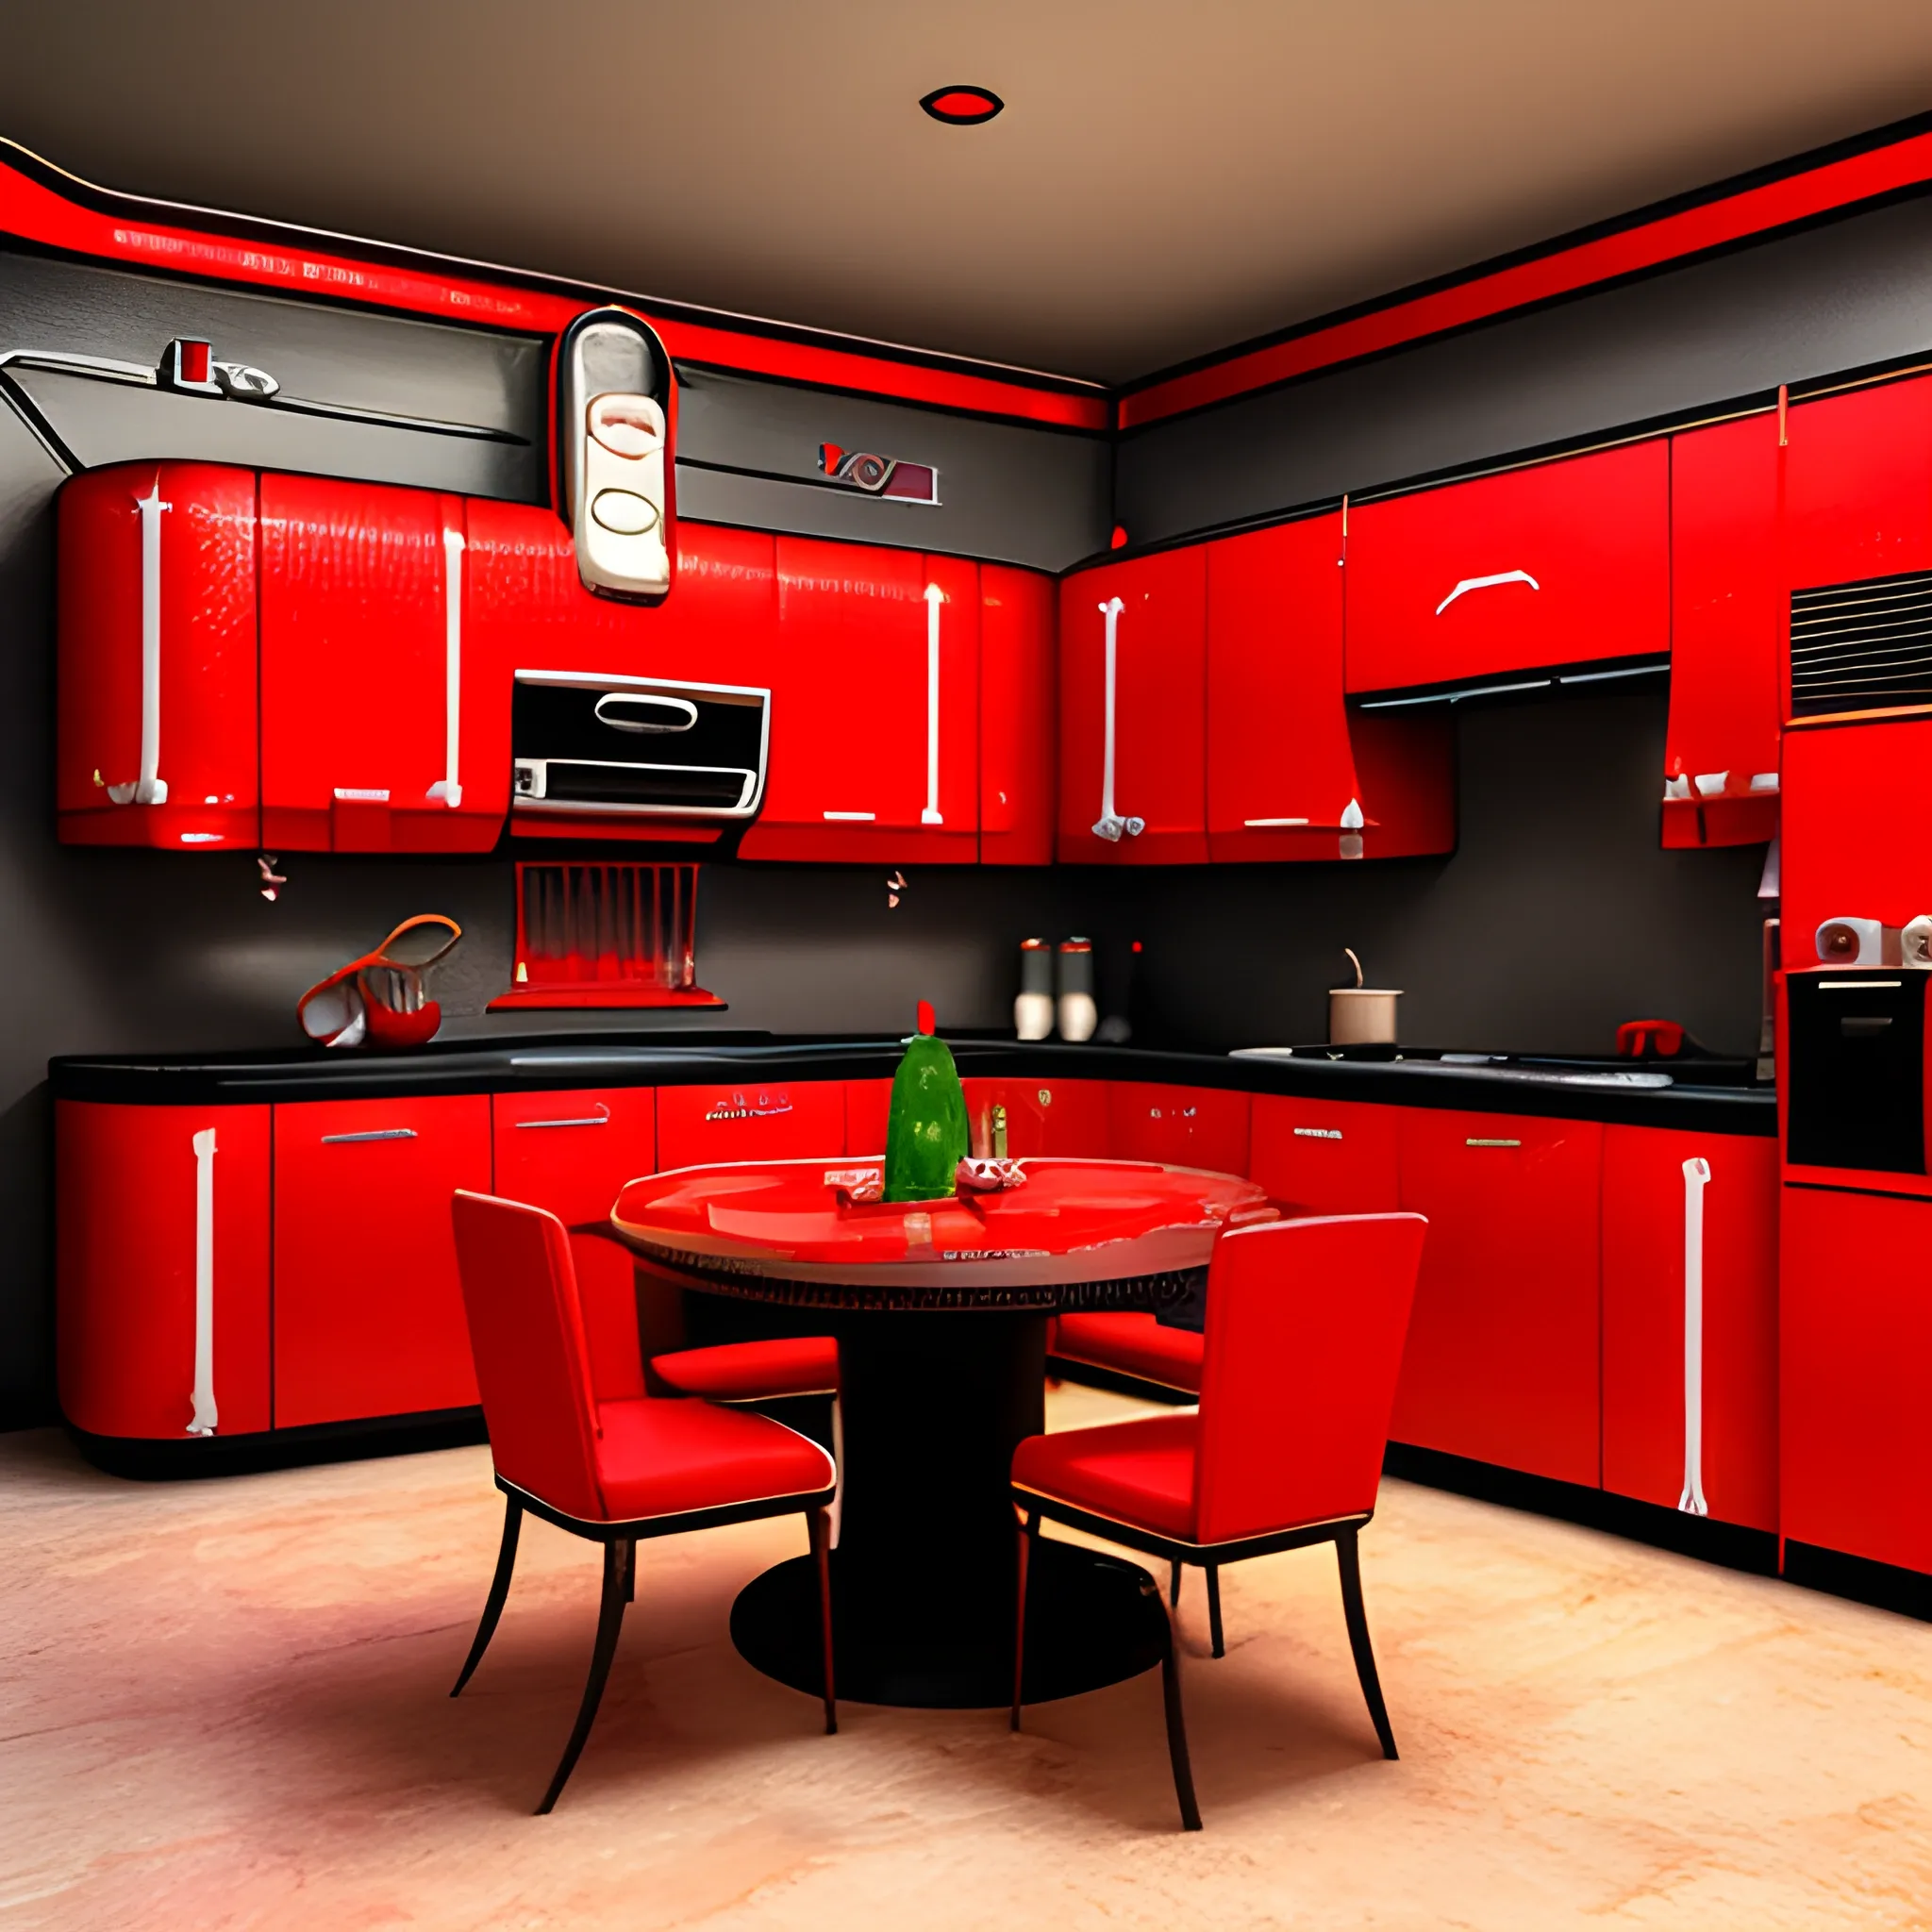 Kitchen, fancy dinner, retro futuristic, highly detailed, realistic, 4k, robot maid, red style, Luxurious furniture